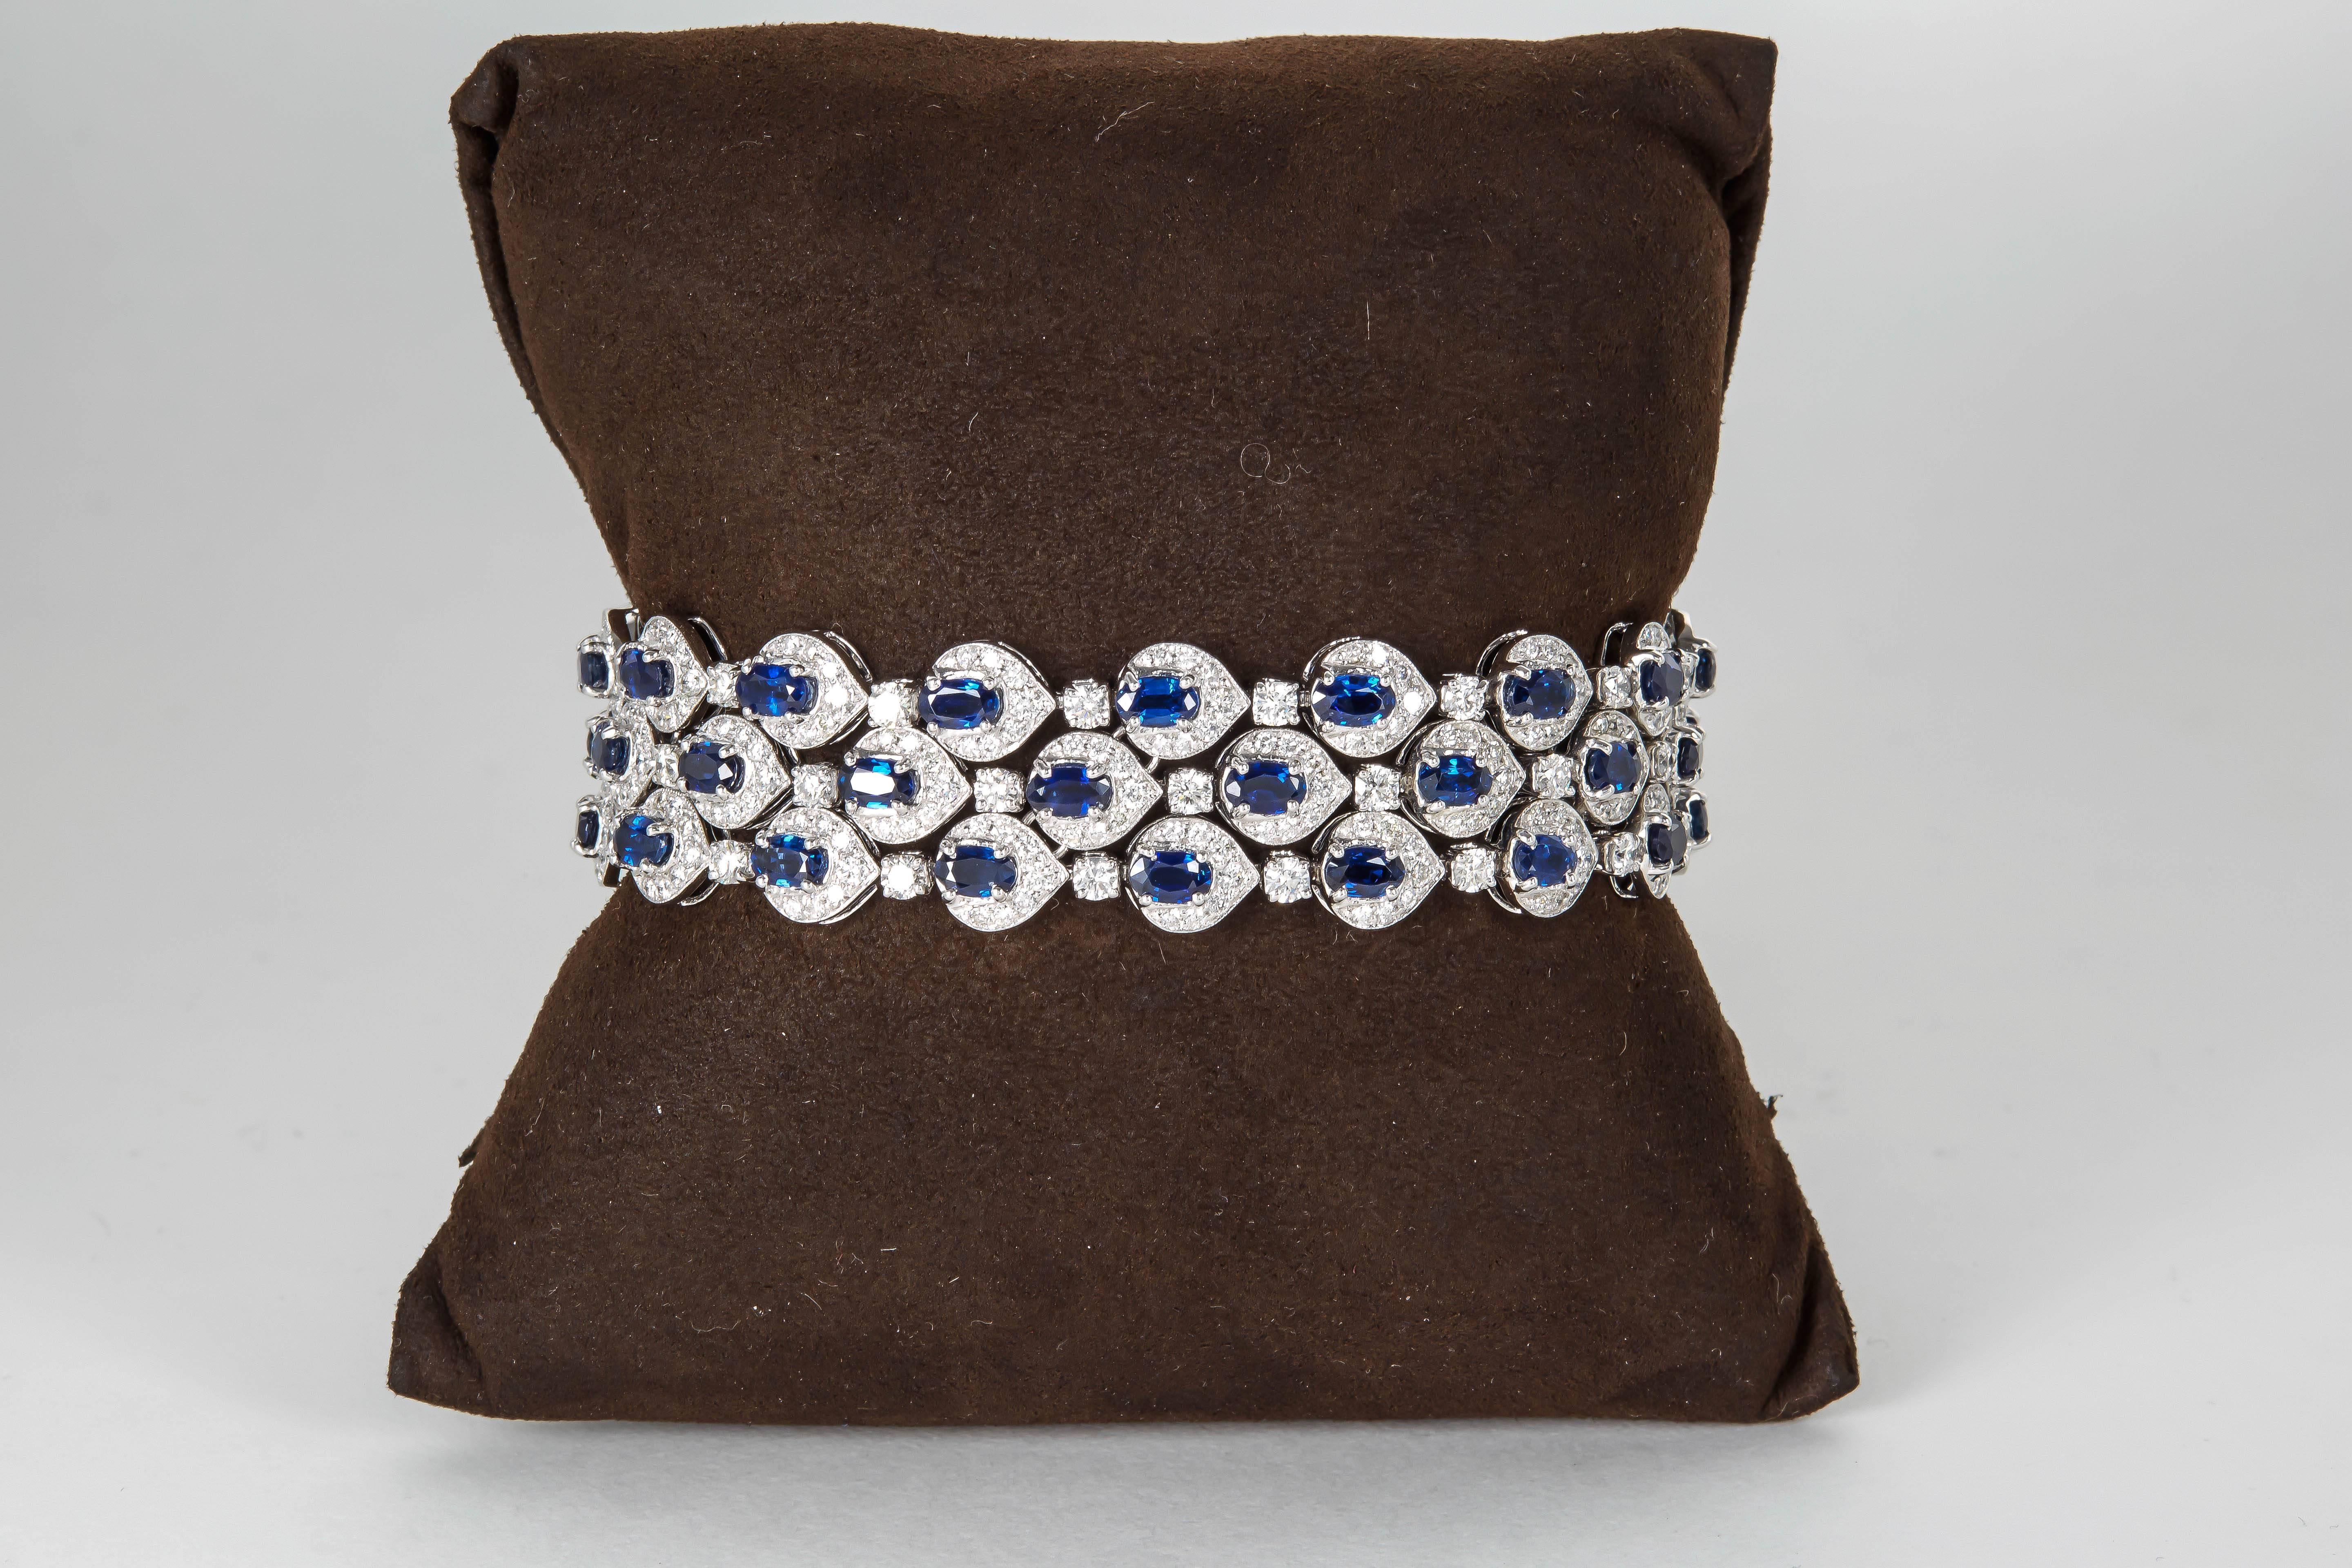 
An elegant sapphire and diamond bracelet in a timeless design.

15.56 carats of fine oval blue sapphires.

9.13 carats of white round brilliant cut diamonds.

18k white gold

Approximately 3/4 of an inch wide.